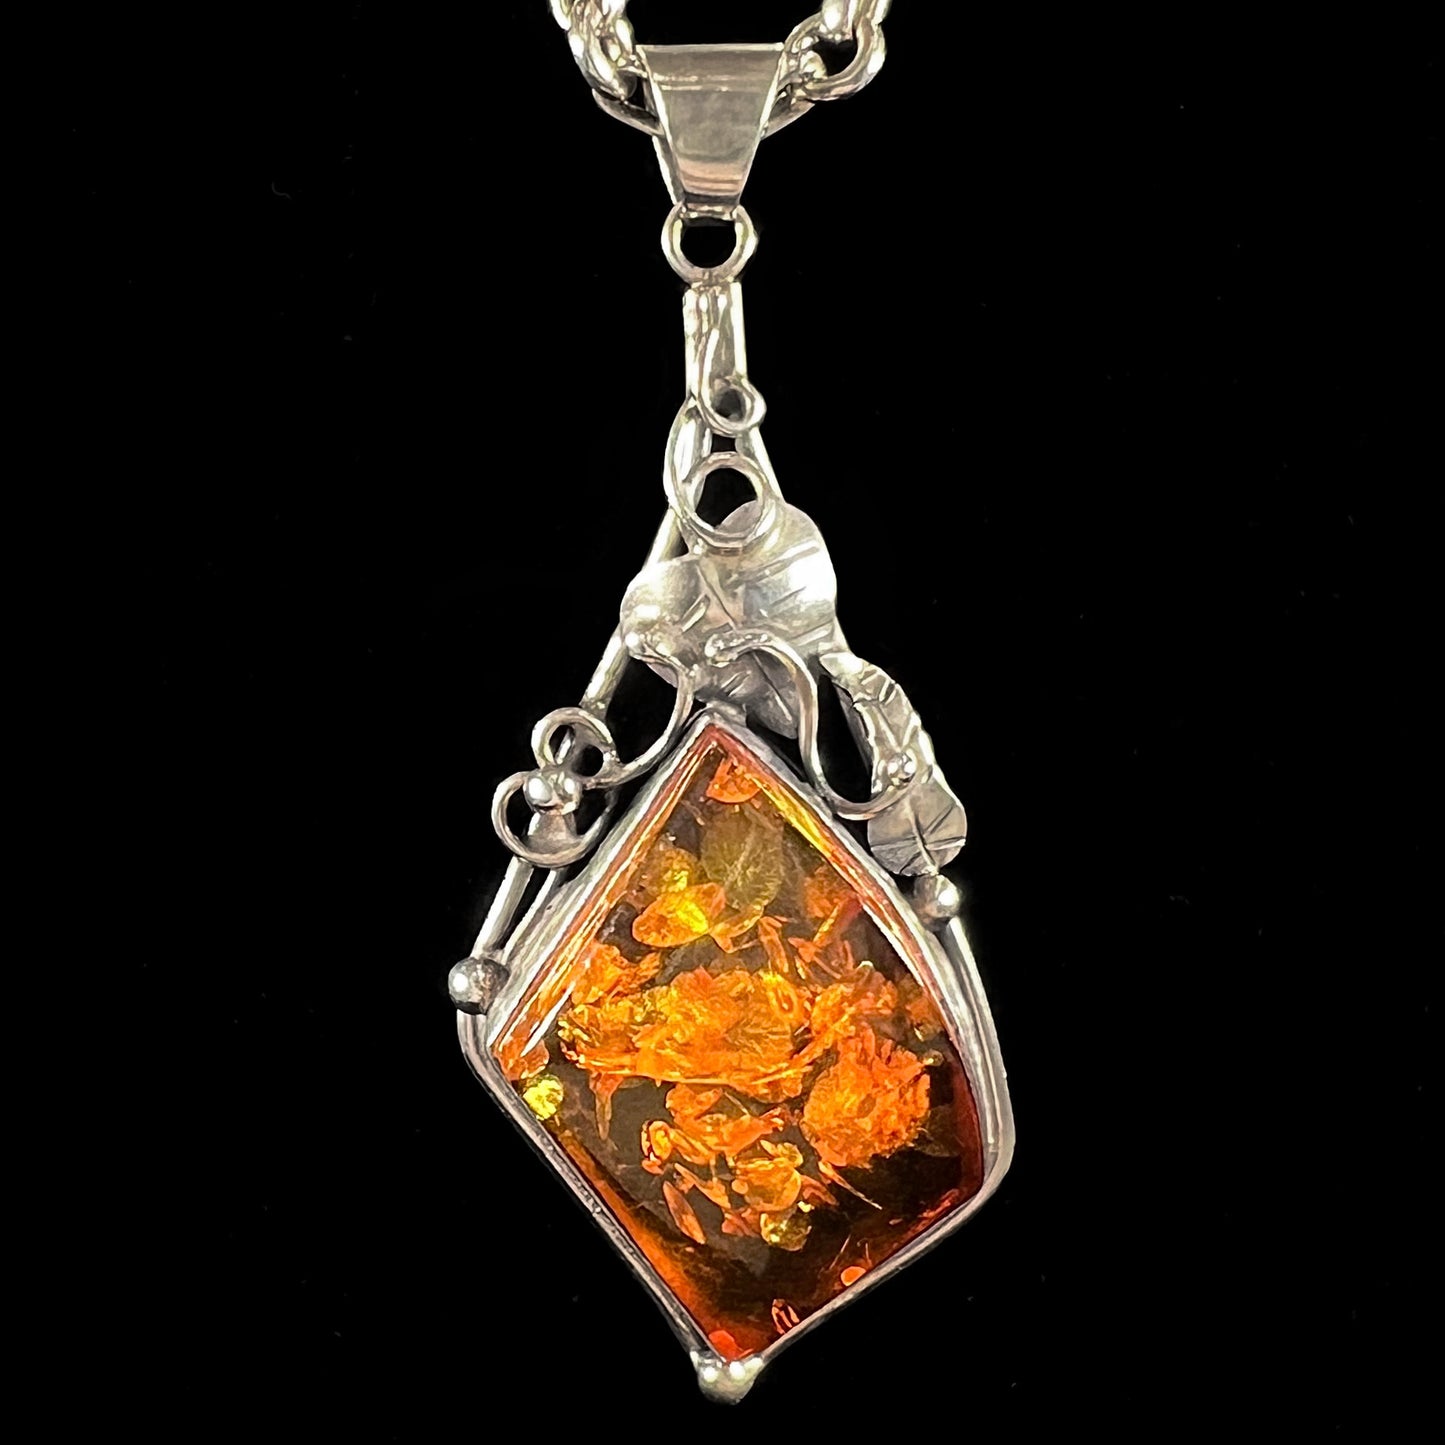 Unisex silver pendant set with a sun-spangled Mexican amber stone, featuring silver leaf design accents.